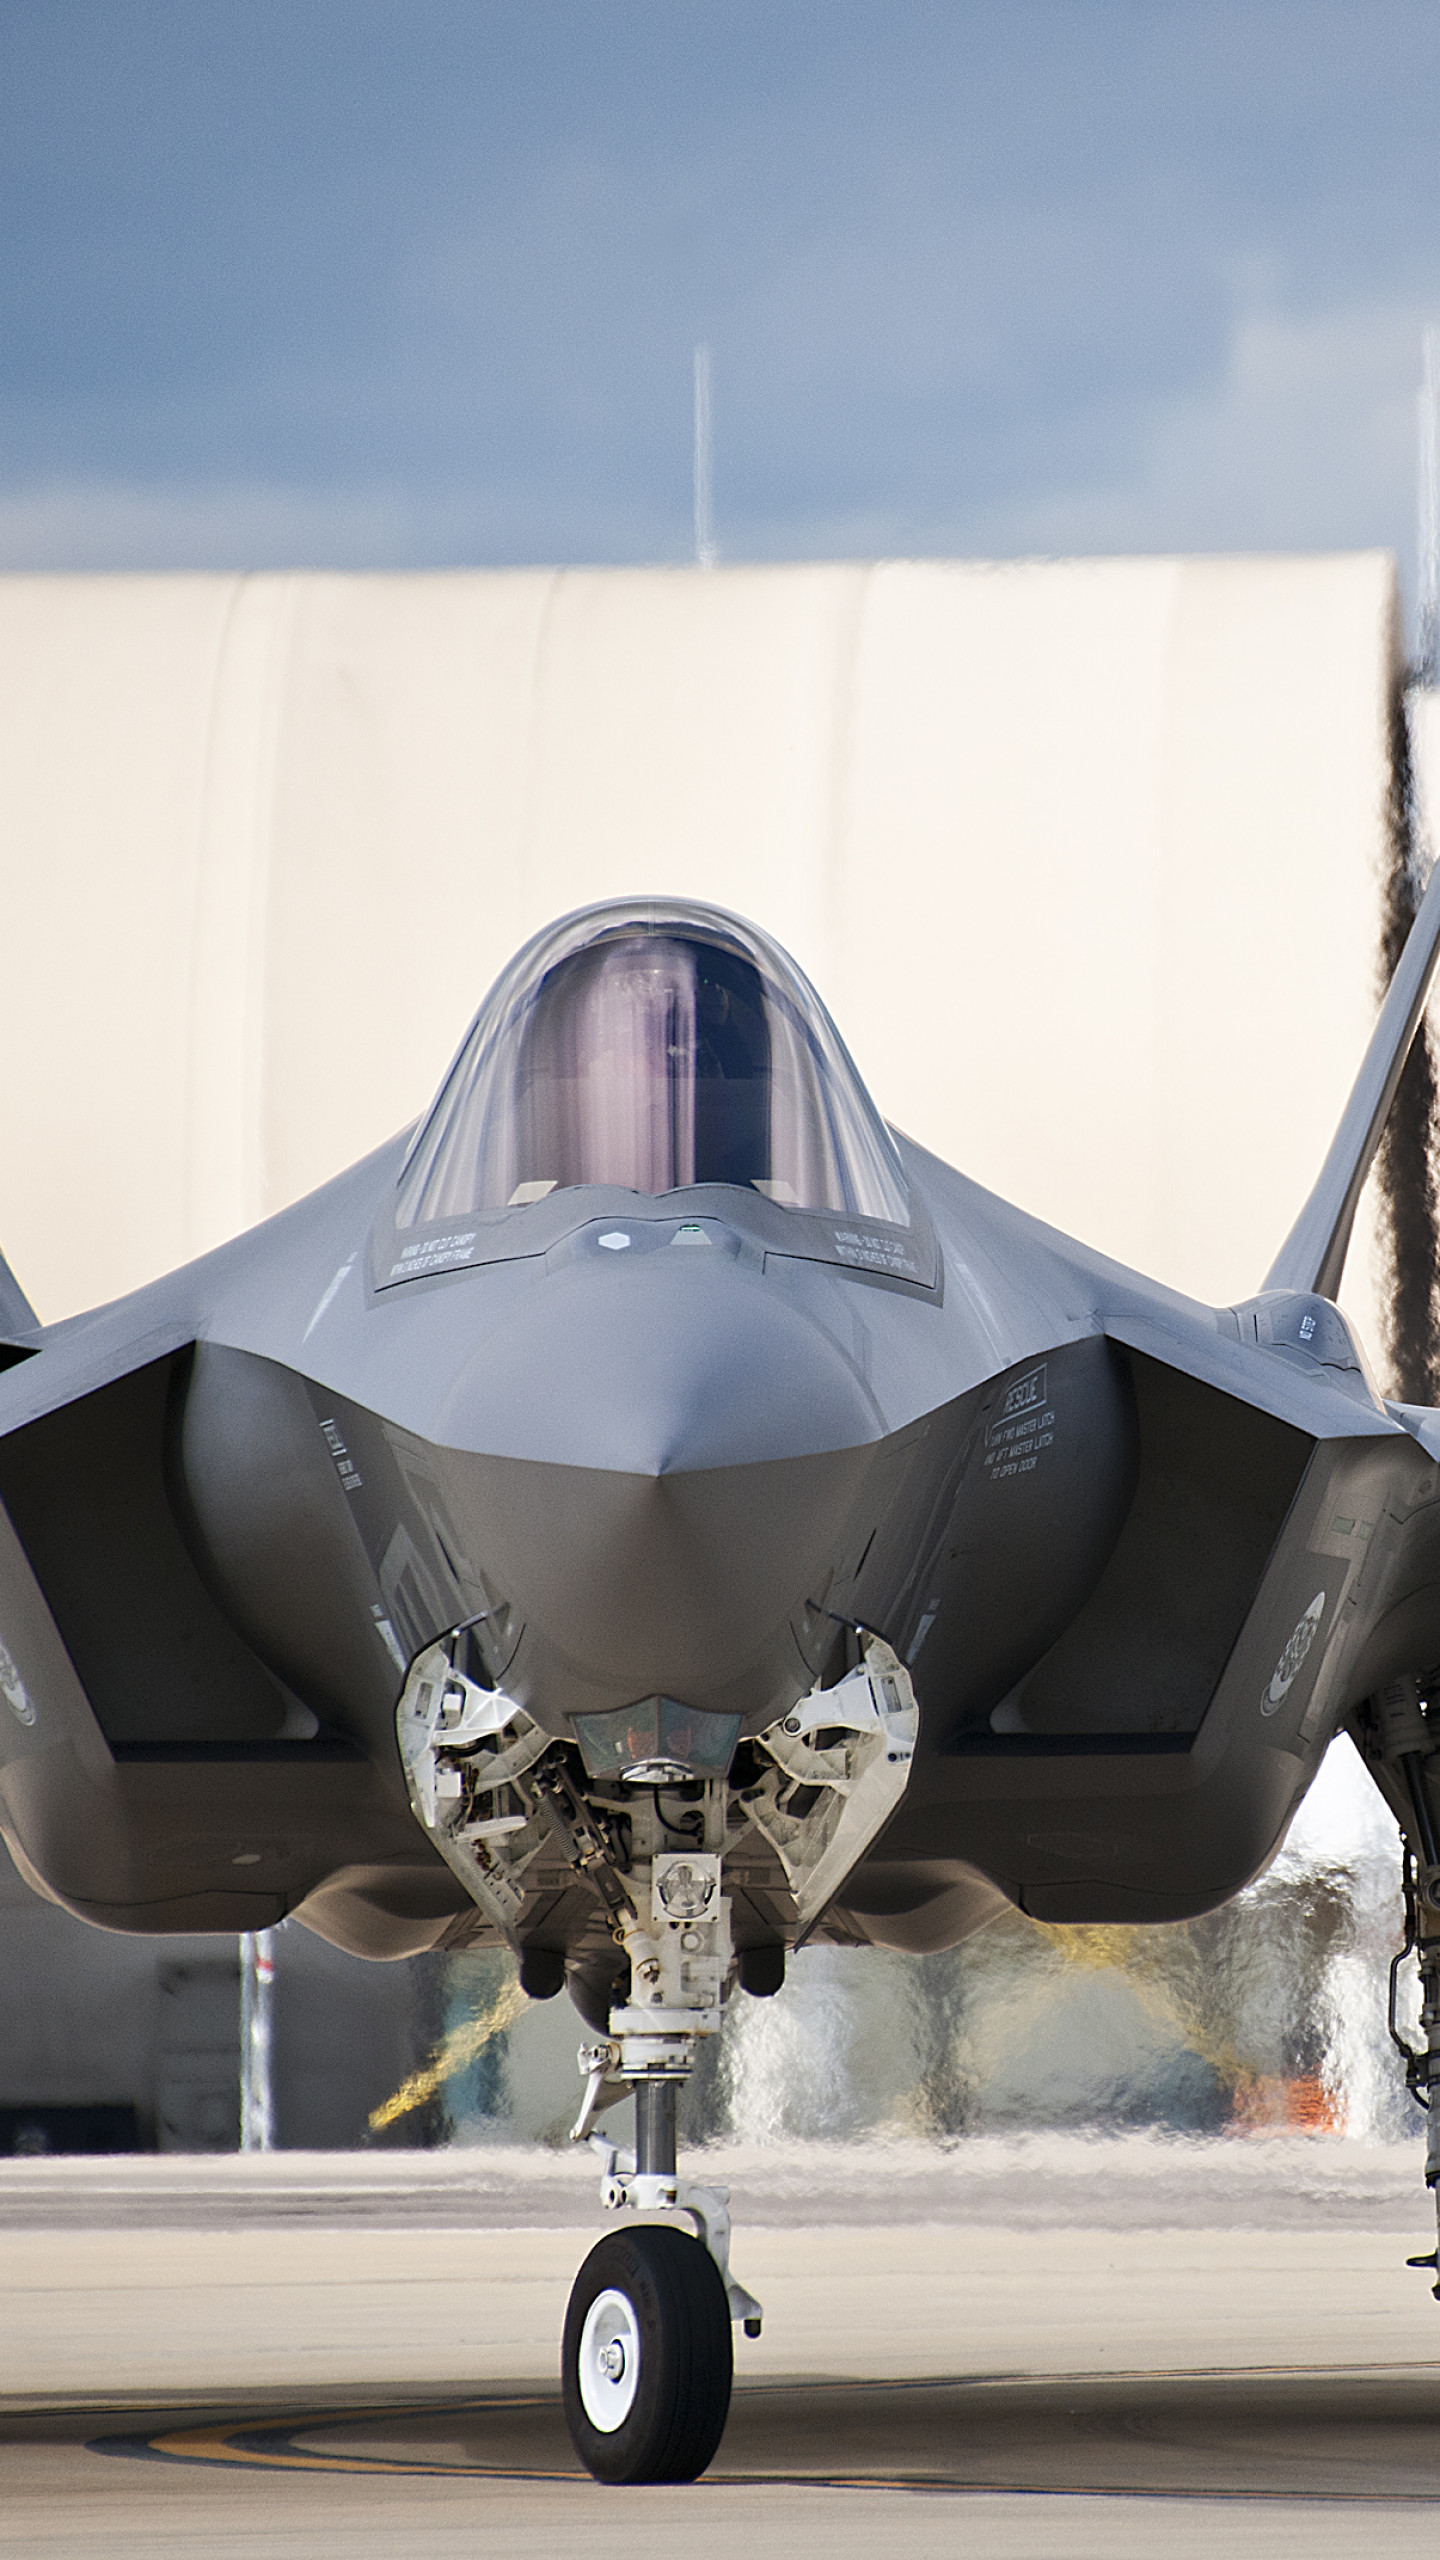 F35 wallpaper by Taboot77  Download on ZEDGE  9e71